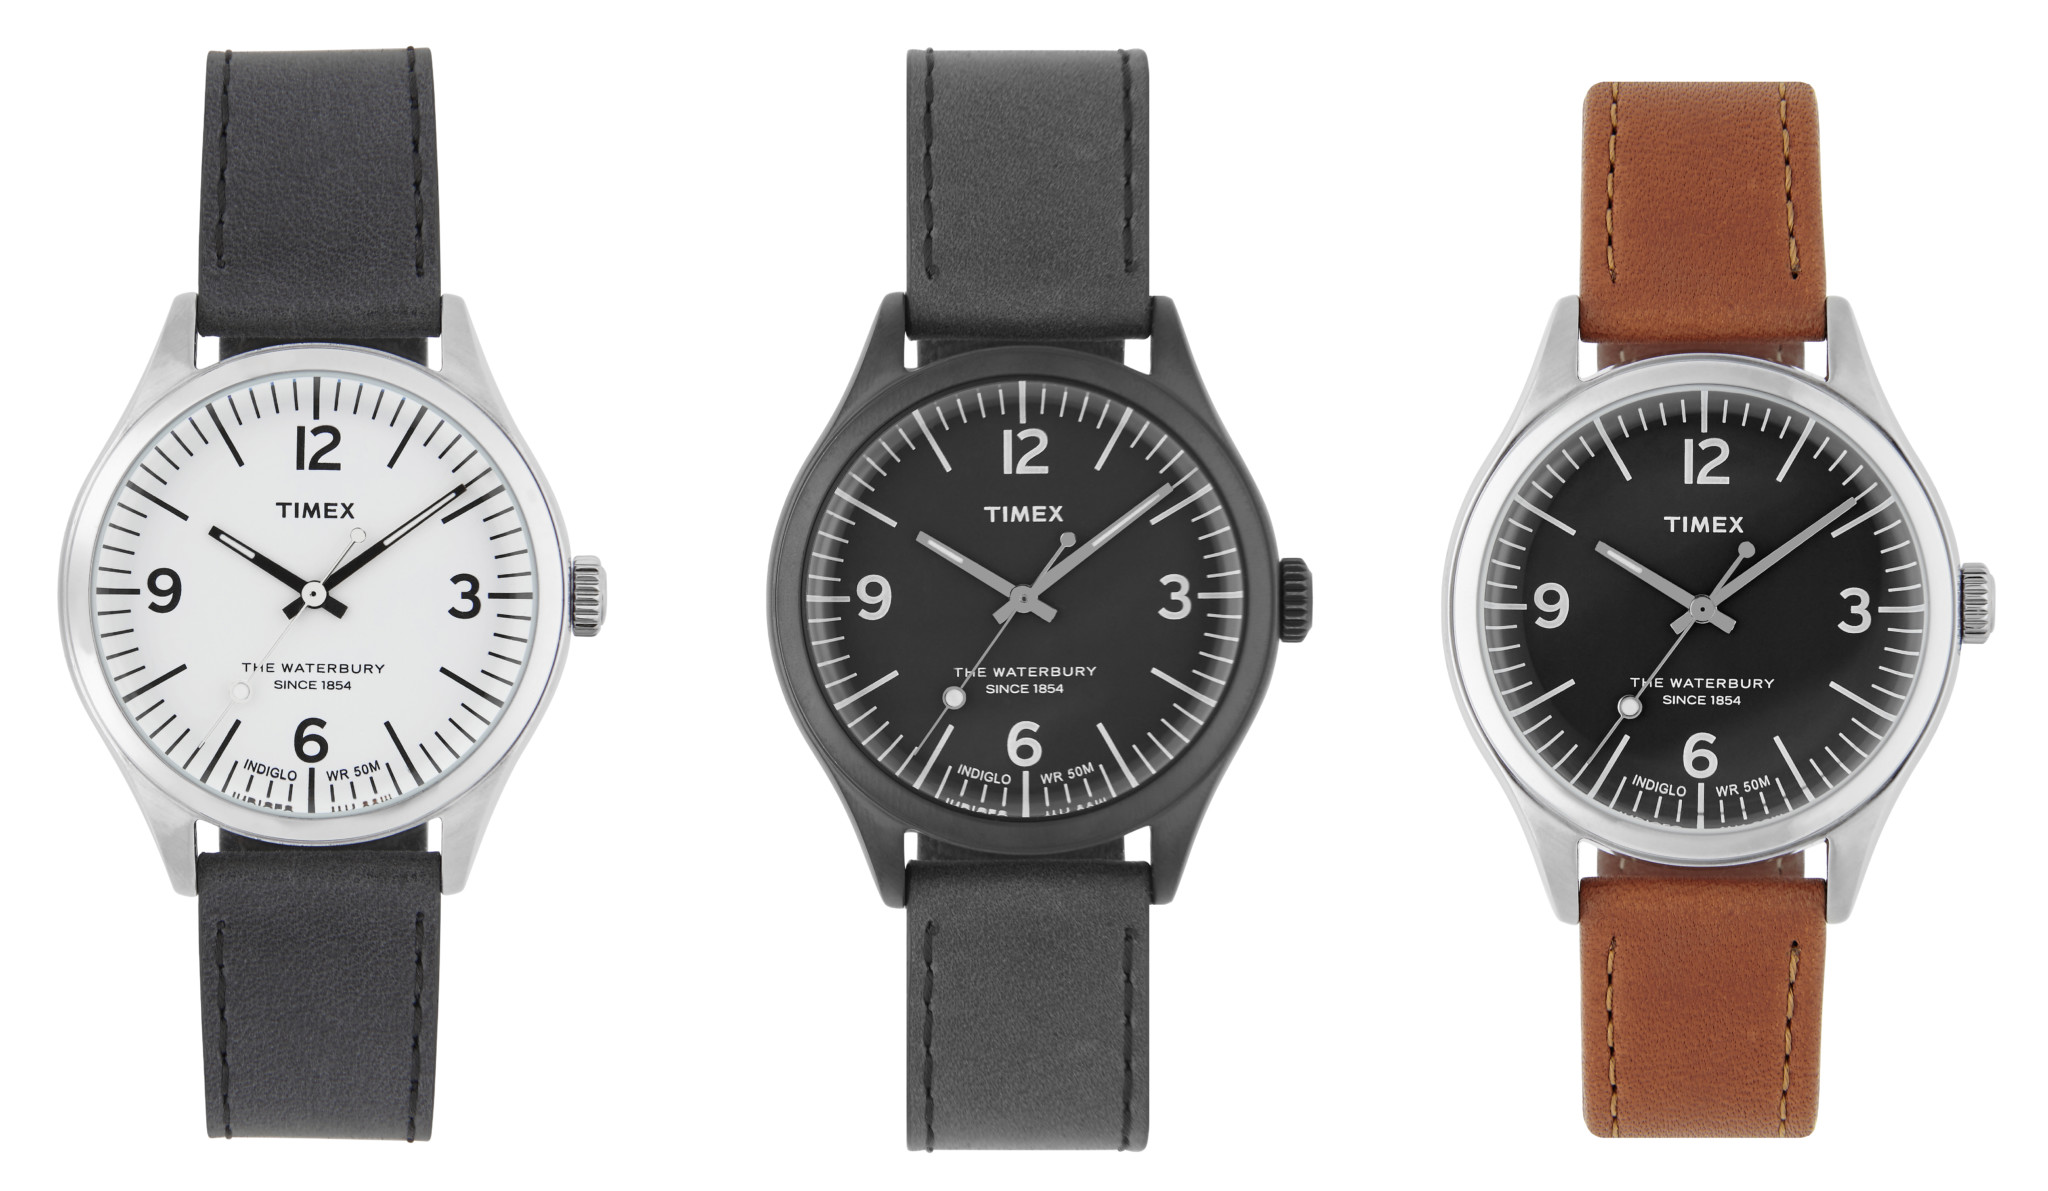 Timex Creates Special Editions To Sell Exclusively On MrPorter.com